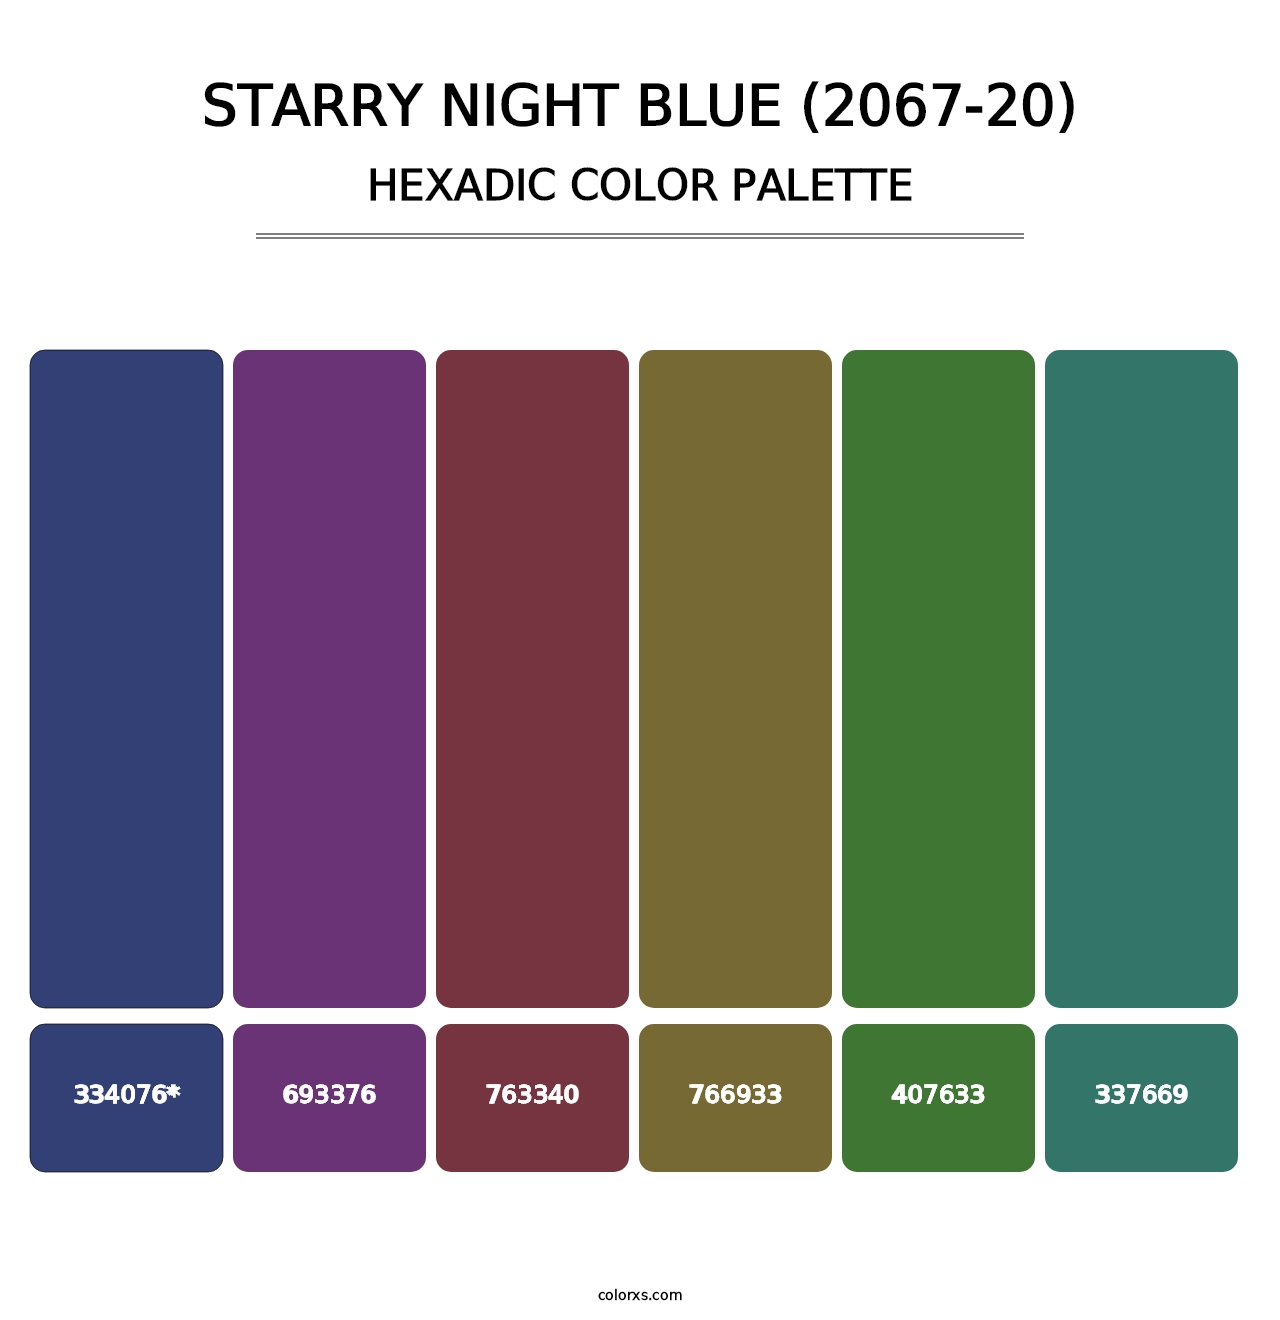 Starry Night Blue (2067-20) - Hexadic Color Palette